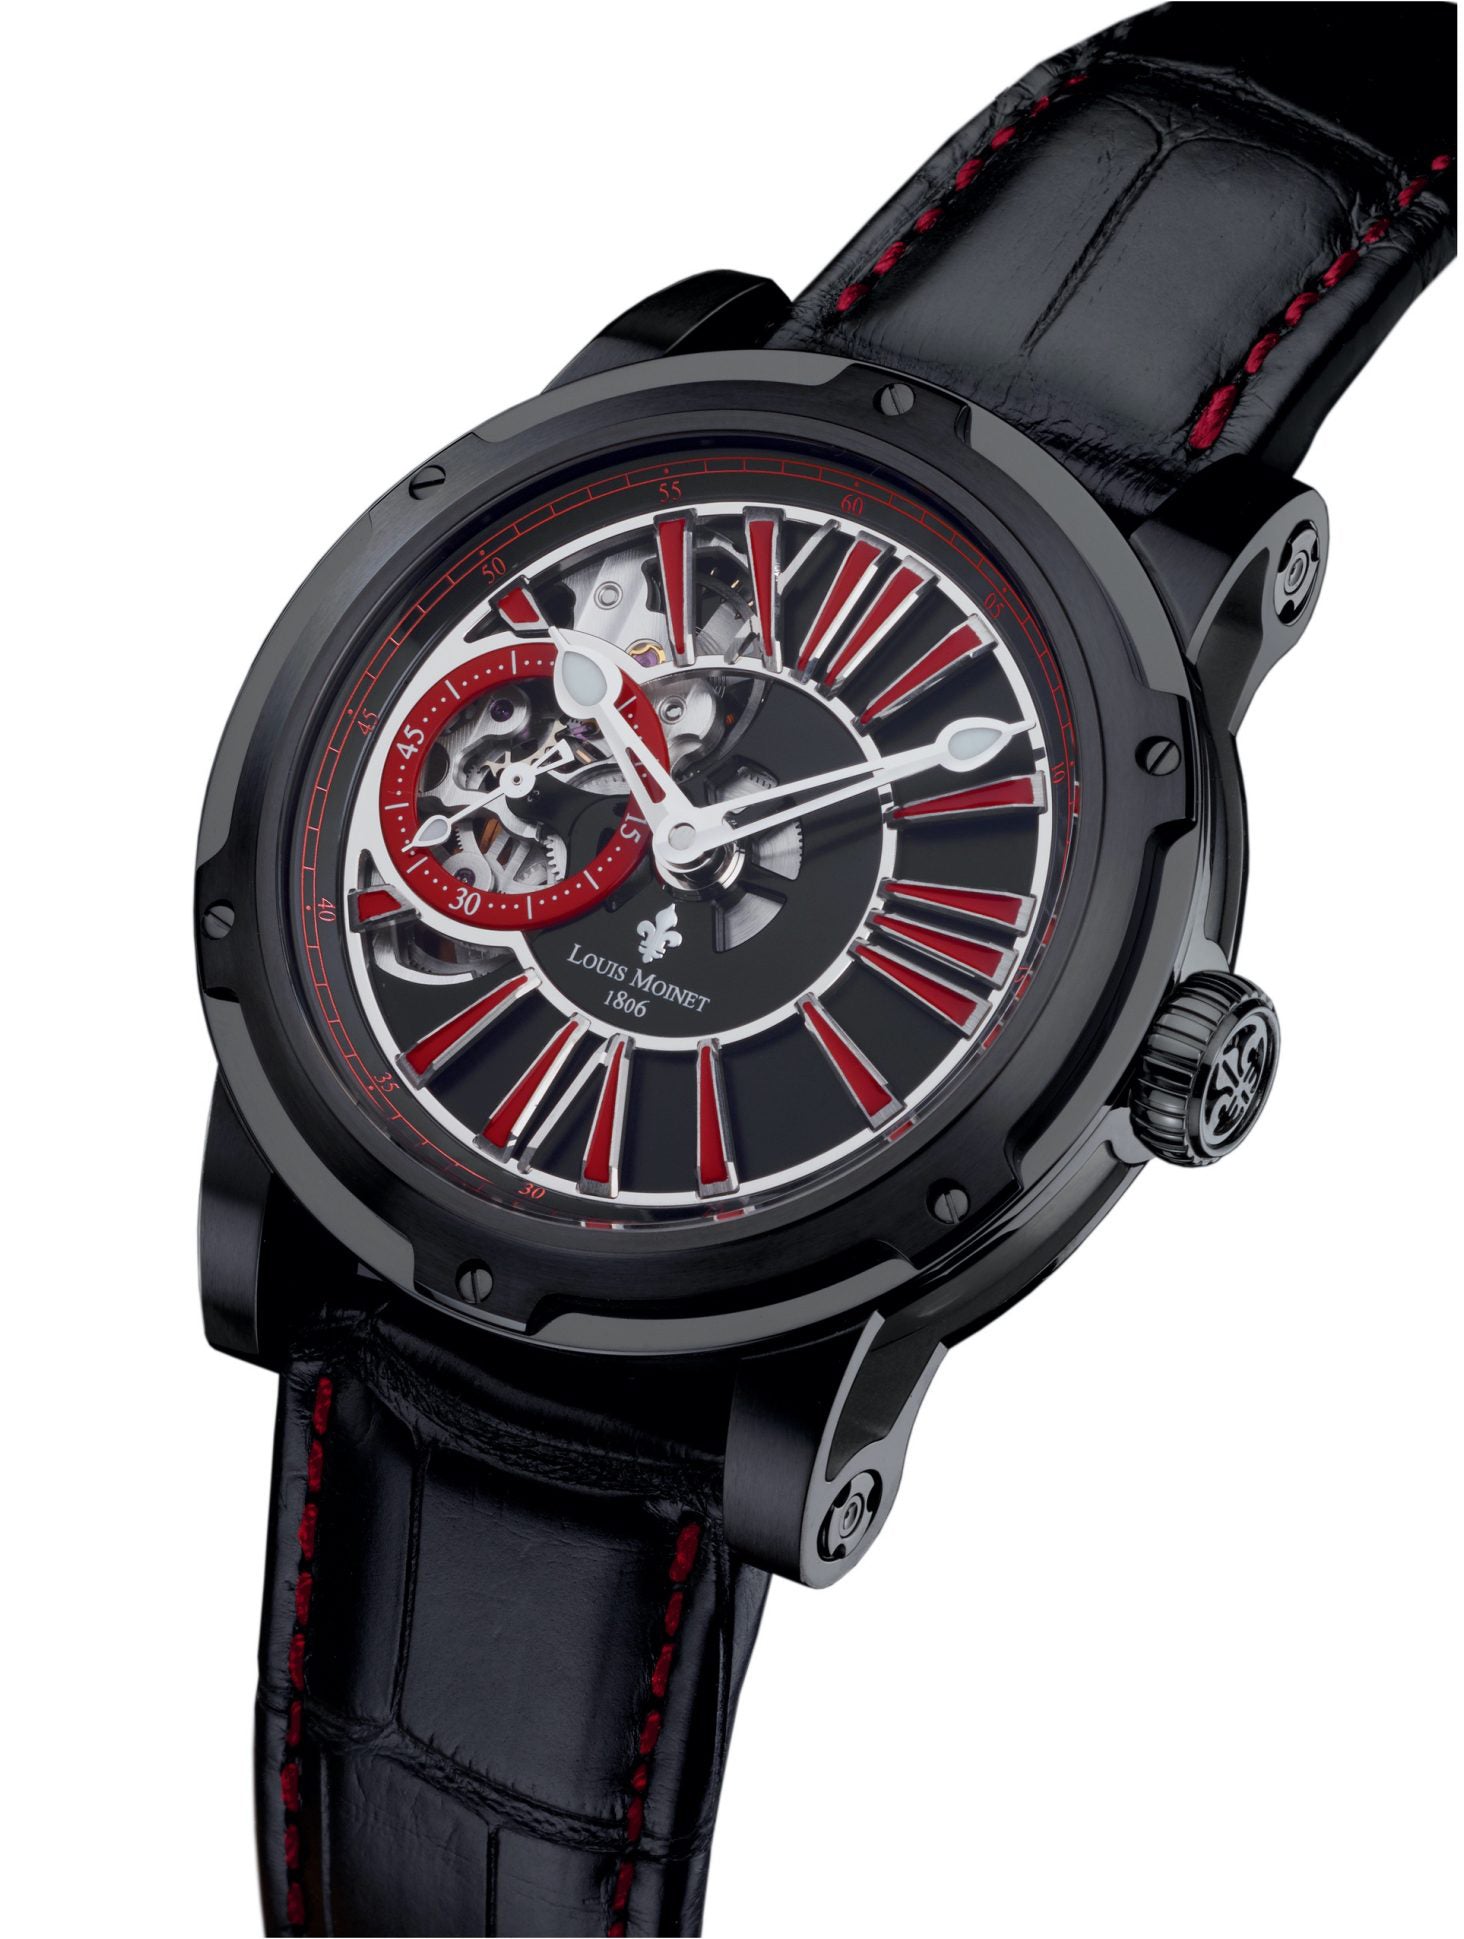 Louis Moinet Watch Metropolis Black Red Limited Edition